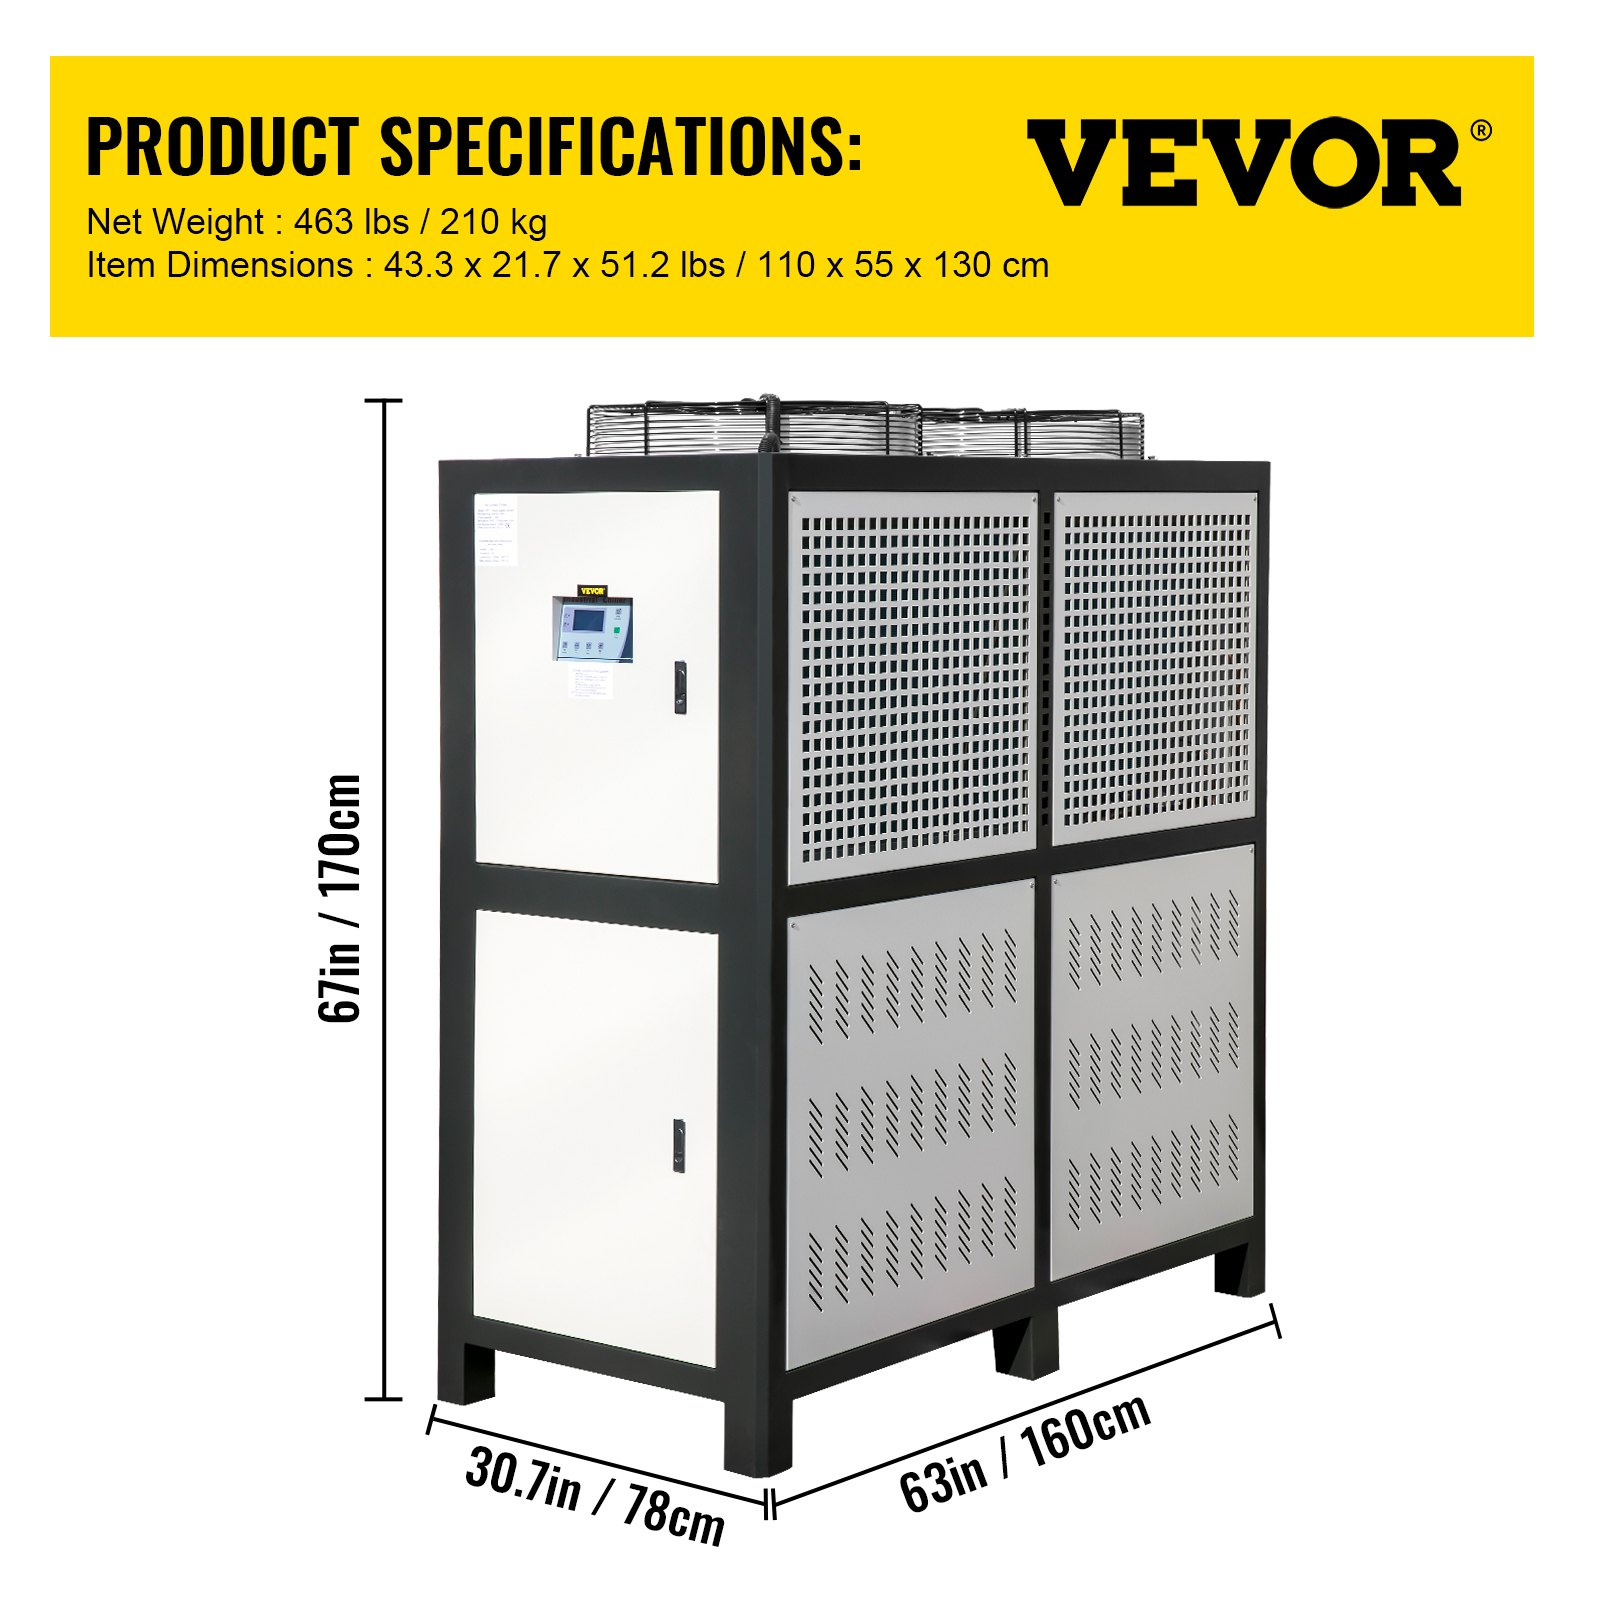 VEVOR Water Chiller 15Ton, Capacity Industrial Chiller 15Hp, Air-Cooled Water Chiller, Finned Condenser, w/ Micro-Computer Control, Stainless Steel Water Tank Chiller Machine for Cooling Water, Goodies N Stuff